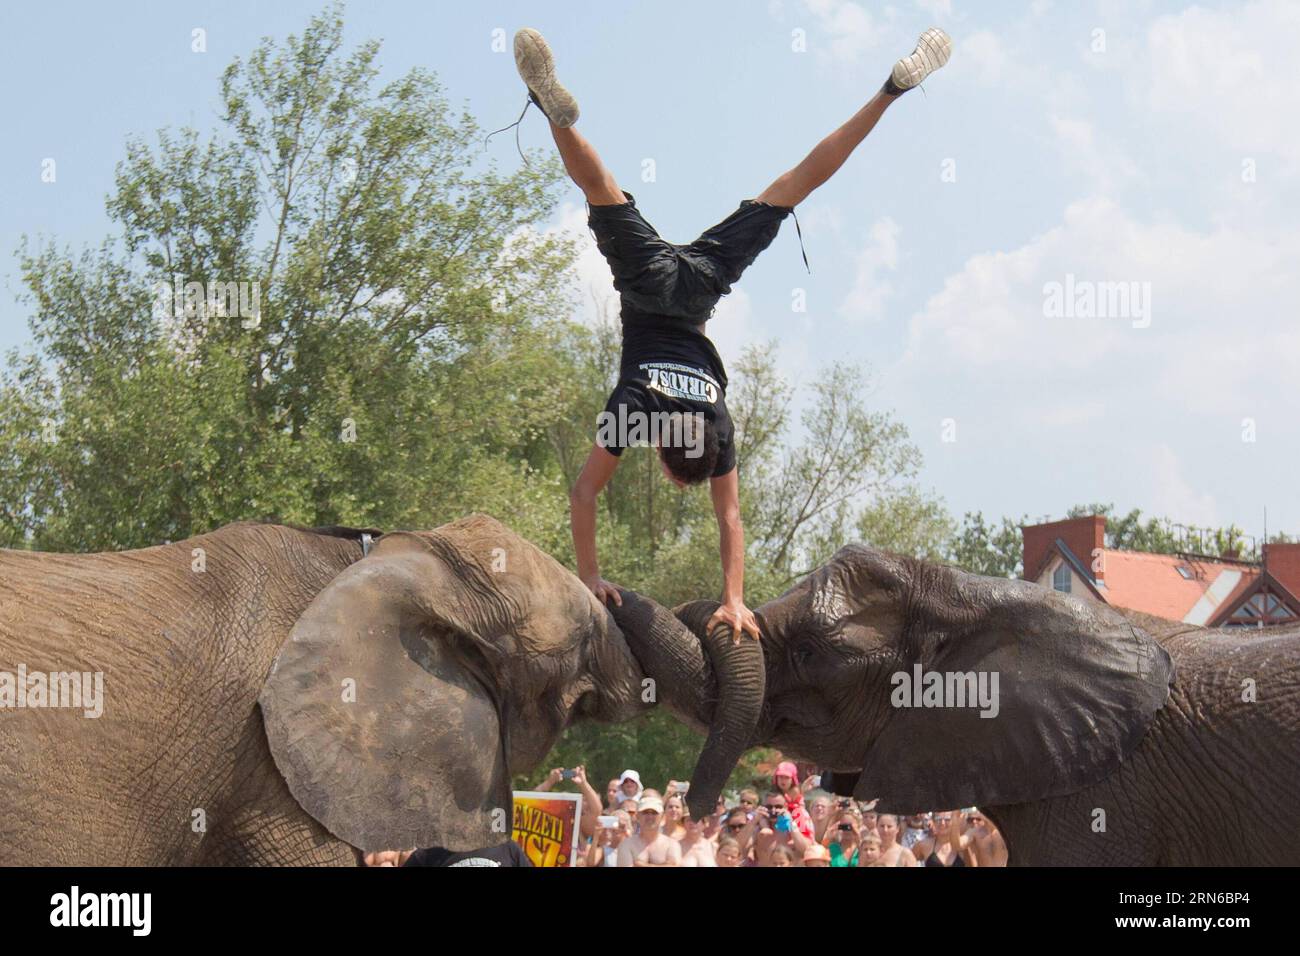 (150718) -- BALATONLELLE, July 18, 2015 -- Germany s Rene Caselly Jr. stands with his hands on the noses of two circus elephants of the Caselly Family at Balatonlelle, Hungary on July 18, 2015. In promotion of Circus Night, the Caselly Family and their elephants performed a short special show on the beach of Balaton. ) HUNGARY-BALATONLELLE-SUMMER-CIRCUS-ELEPHANT AttilaxVolgyi PUBLICATIONxNOTxINxCHN   150718  July 18 2015 Germany S René  Jr stands With His Hands ON The nose of Two Circus Elephants of The  Family AT  Hungary ON July 18 2015 in Promotion of Circus Night The  Family and their Elep Stock Photo